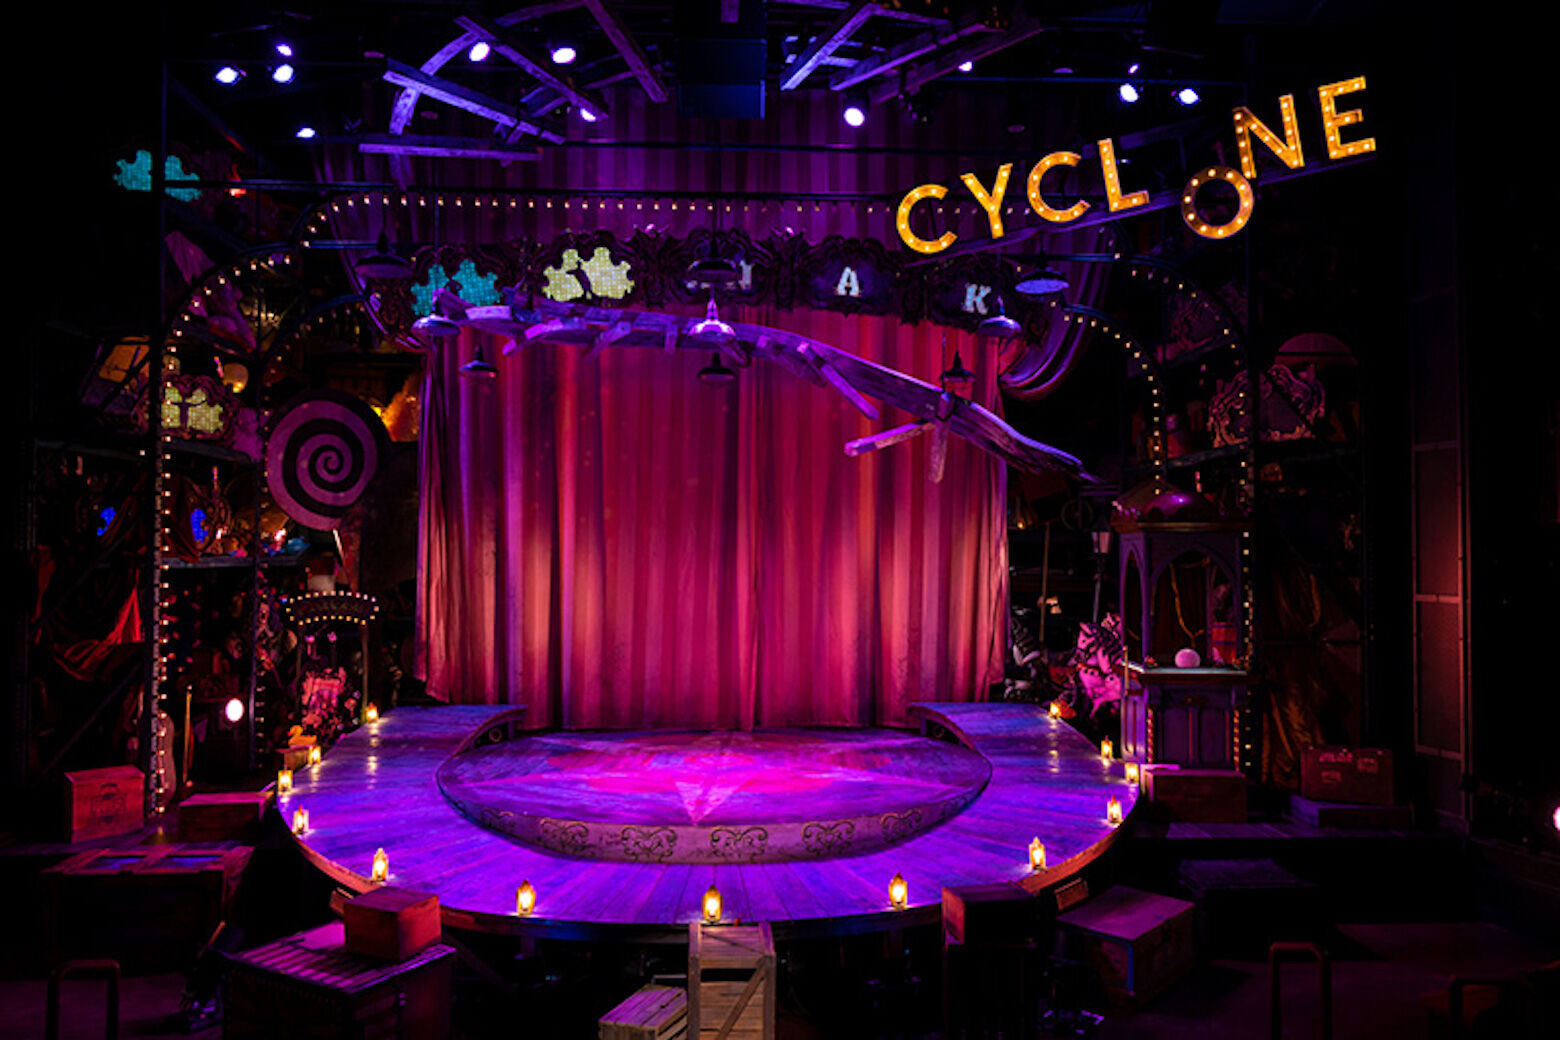 ‘Ride the Cyclone’ at Arena Stage follows teens in purgatory after